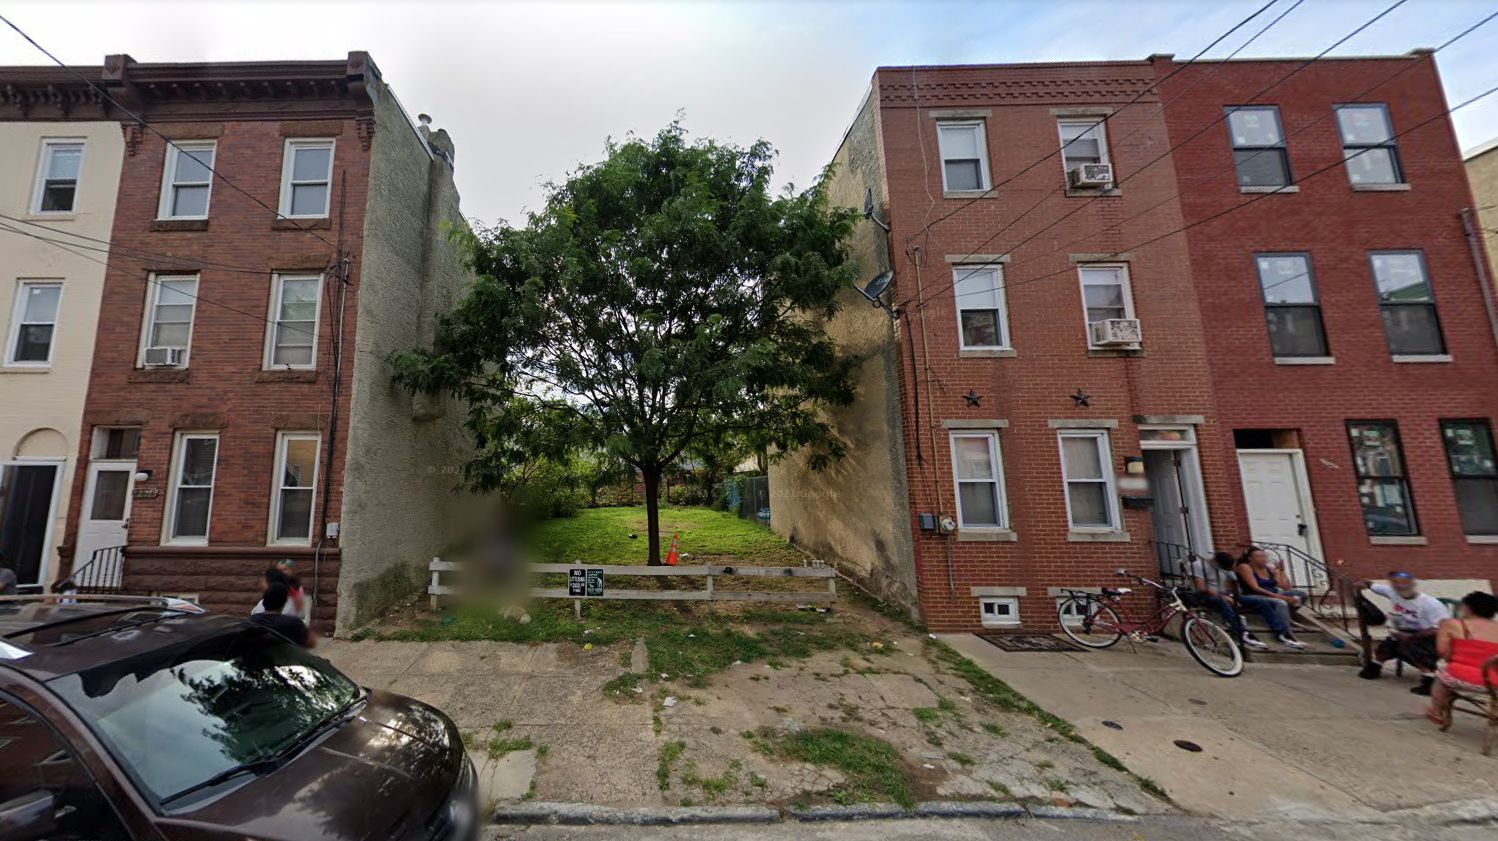 2022 North 3rd Street, prior to redevelopment. Looking west. August 2019. Credit: Google Maps